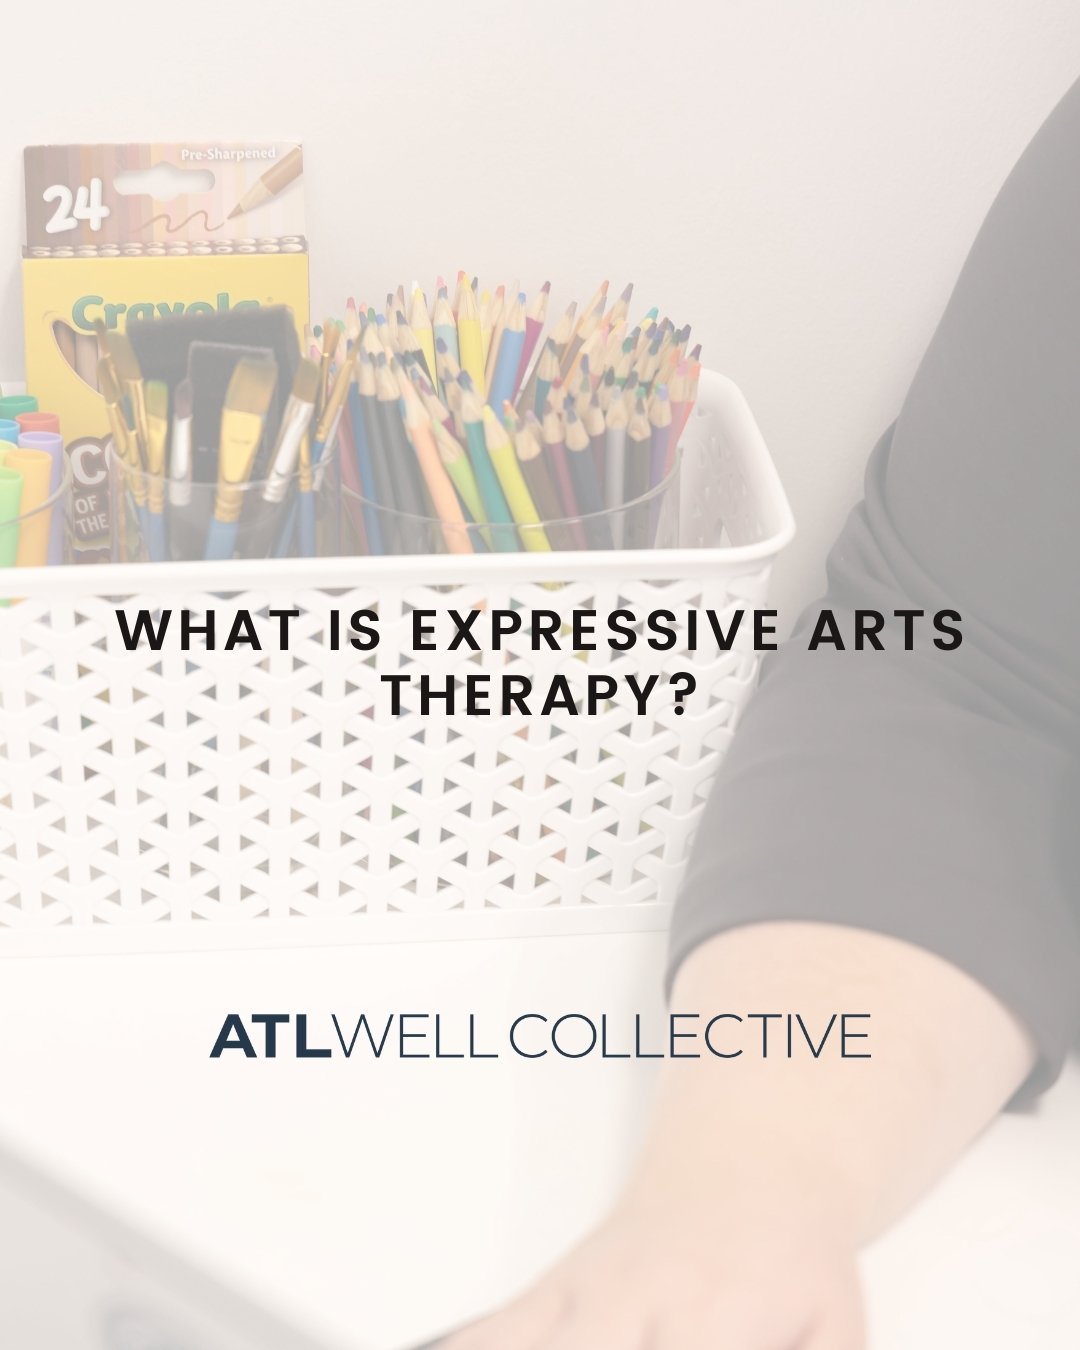 ON THE BLOG - All About Expressive Arts Therapy by Jennifer Oswald 🎨

Visit our blog - - Jennifer tells us all about expressive arts therapy and what to expect when engaging in it during counseling.

Go to atlwell.com/blog &mdash; or use the link in